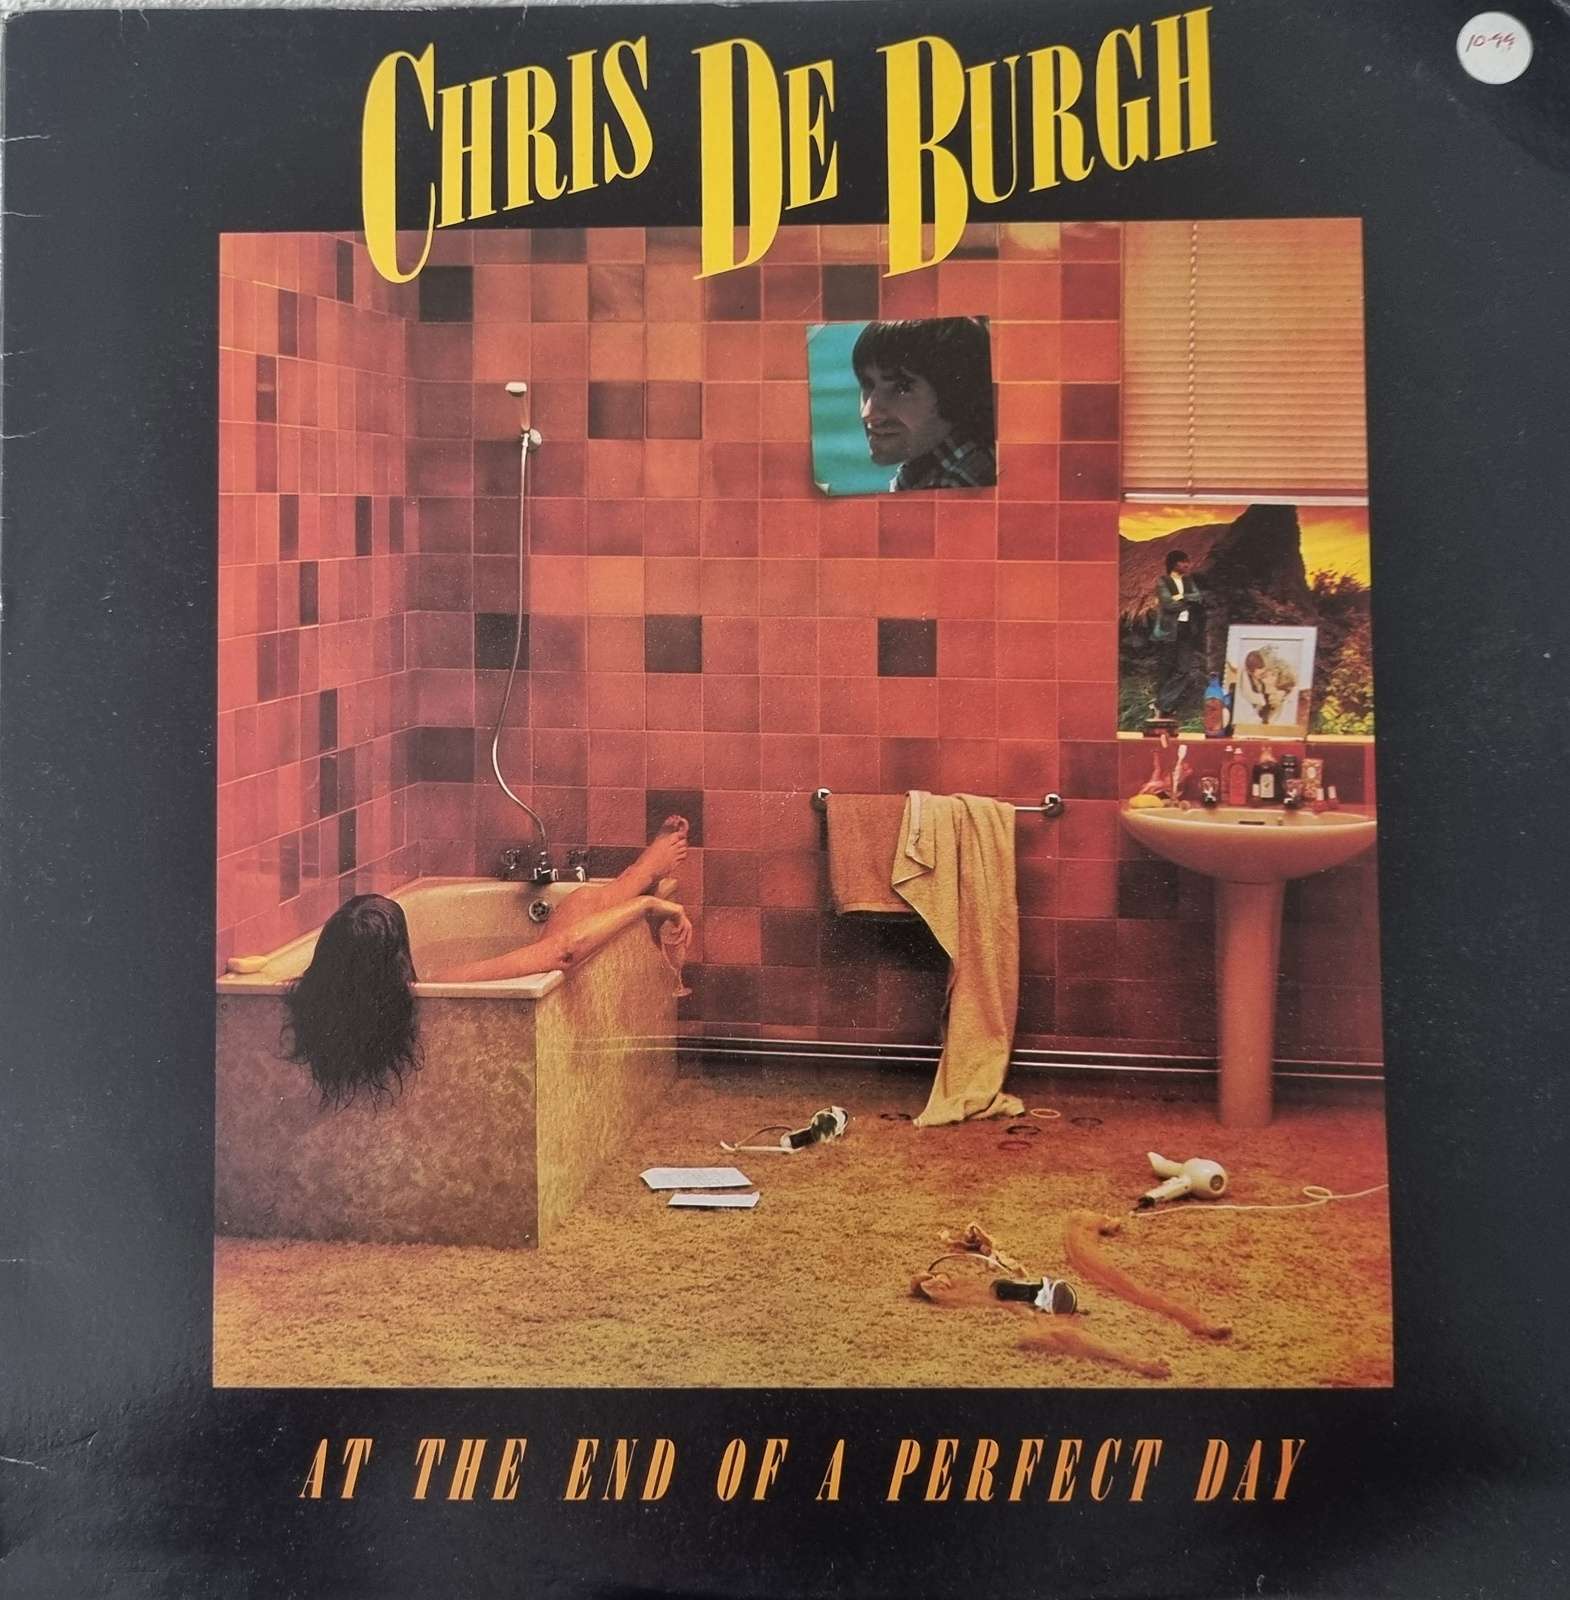 Chris De Burgh - At the End of a Perfect Day (LP)